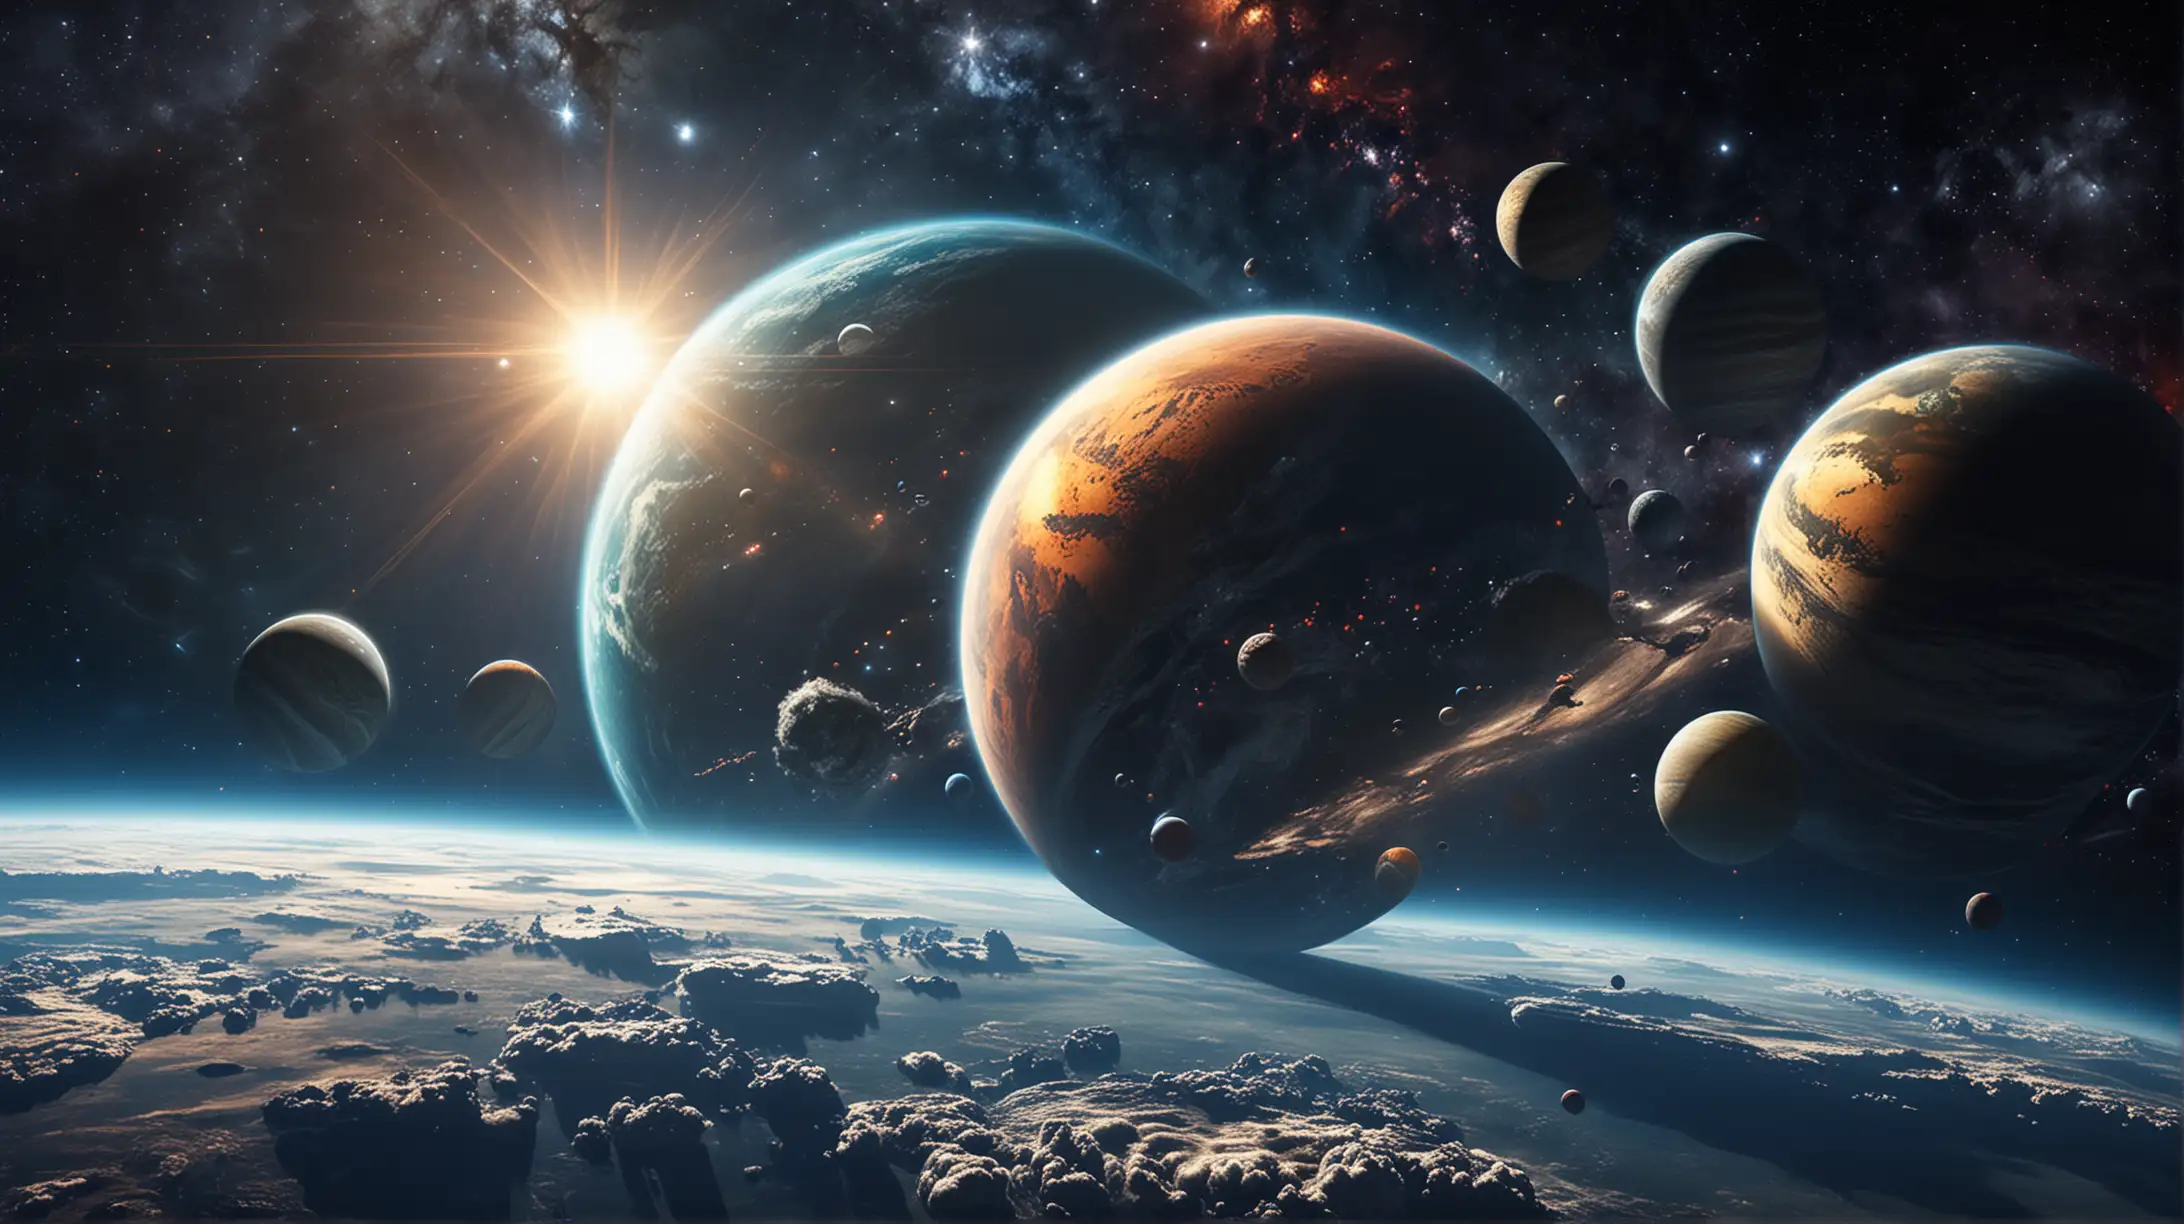 Space Planets and Earth Cosmic Landscape with Celestial Bodies